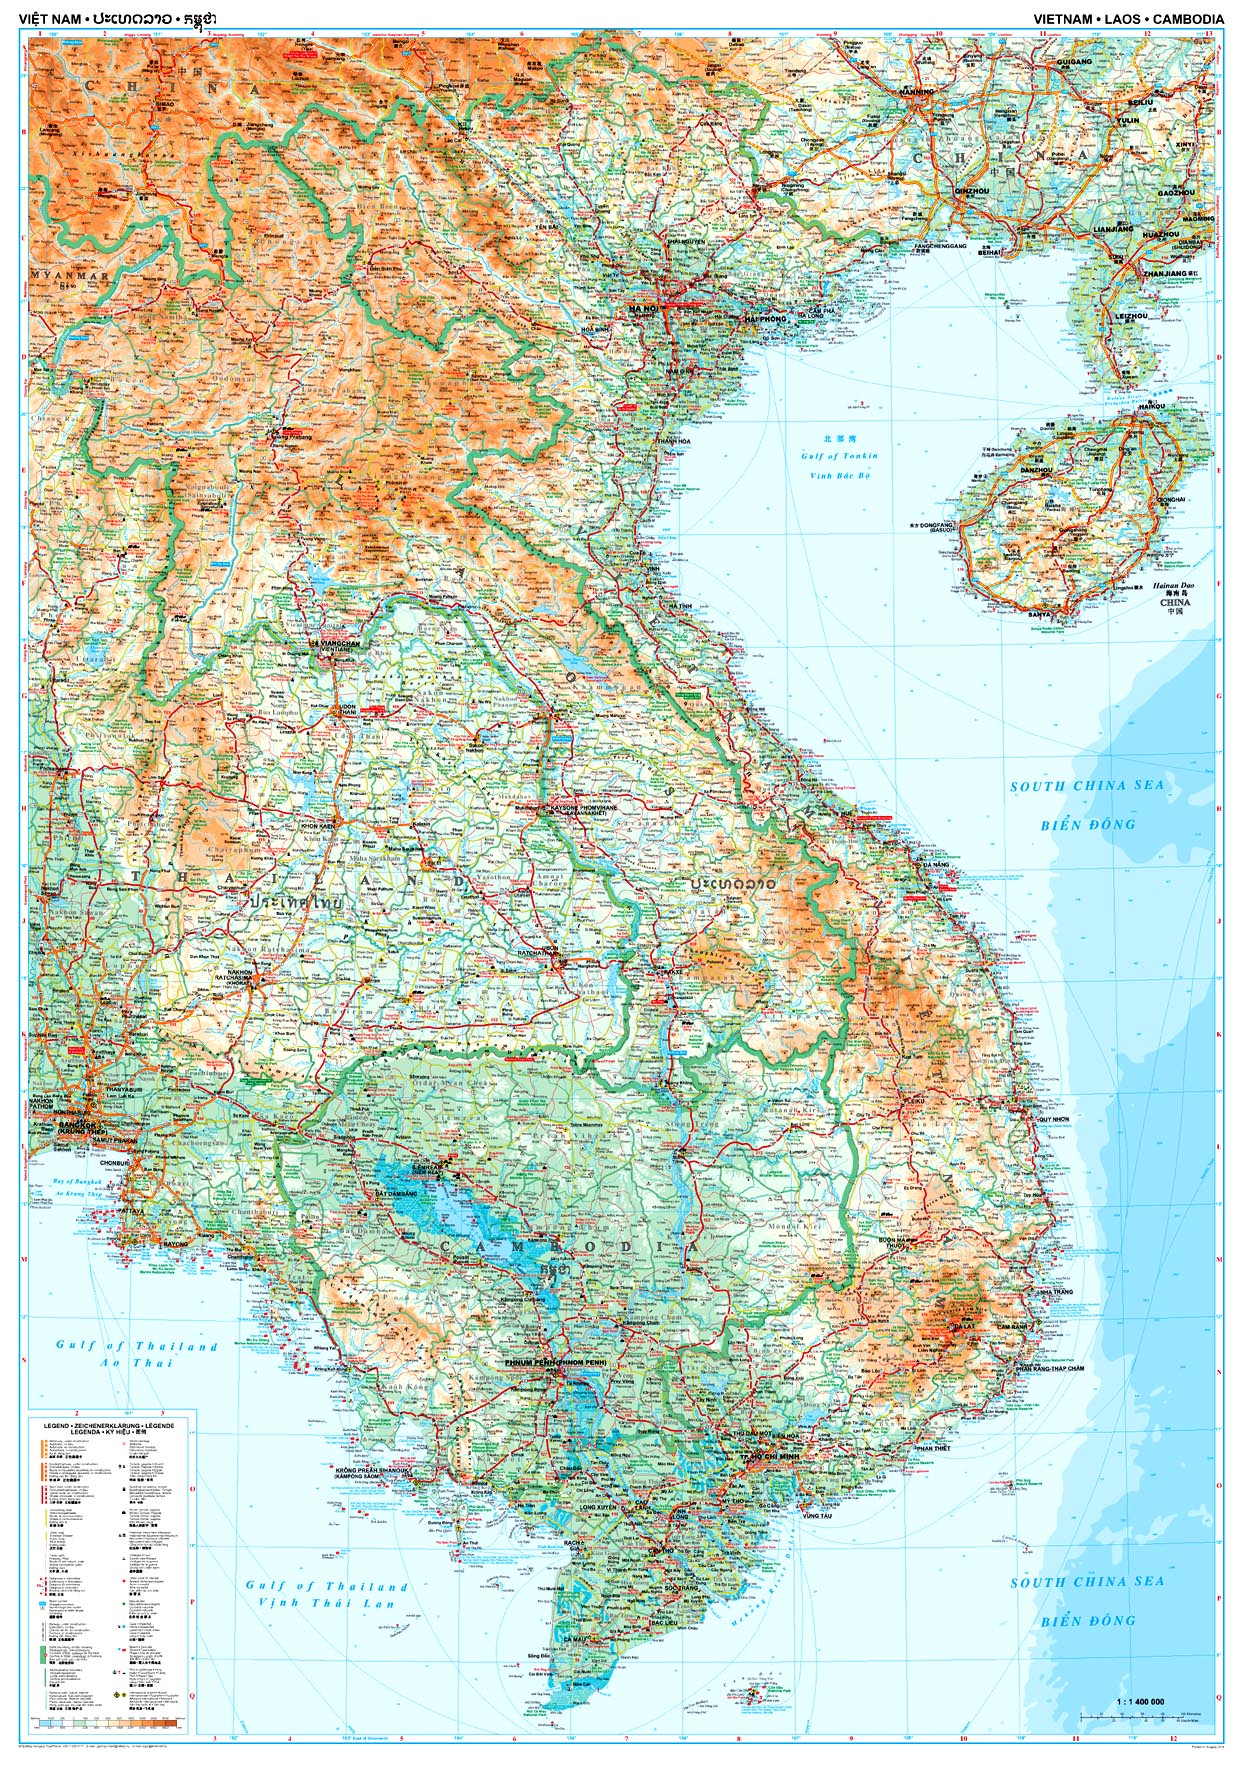 Area covered by the Vietnam, Laos, Cambodia map